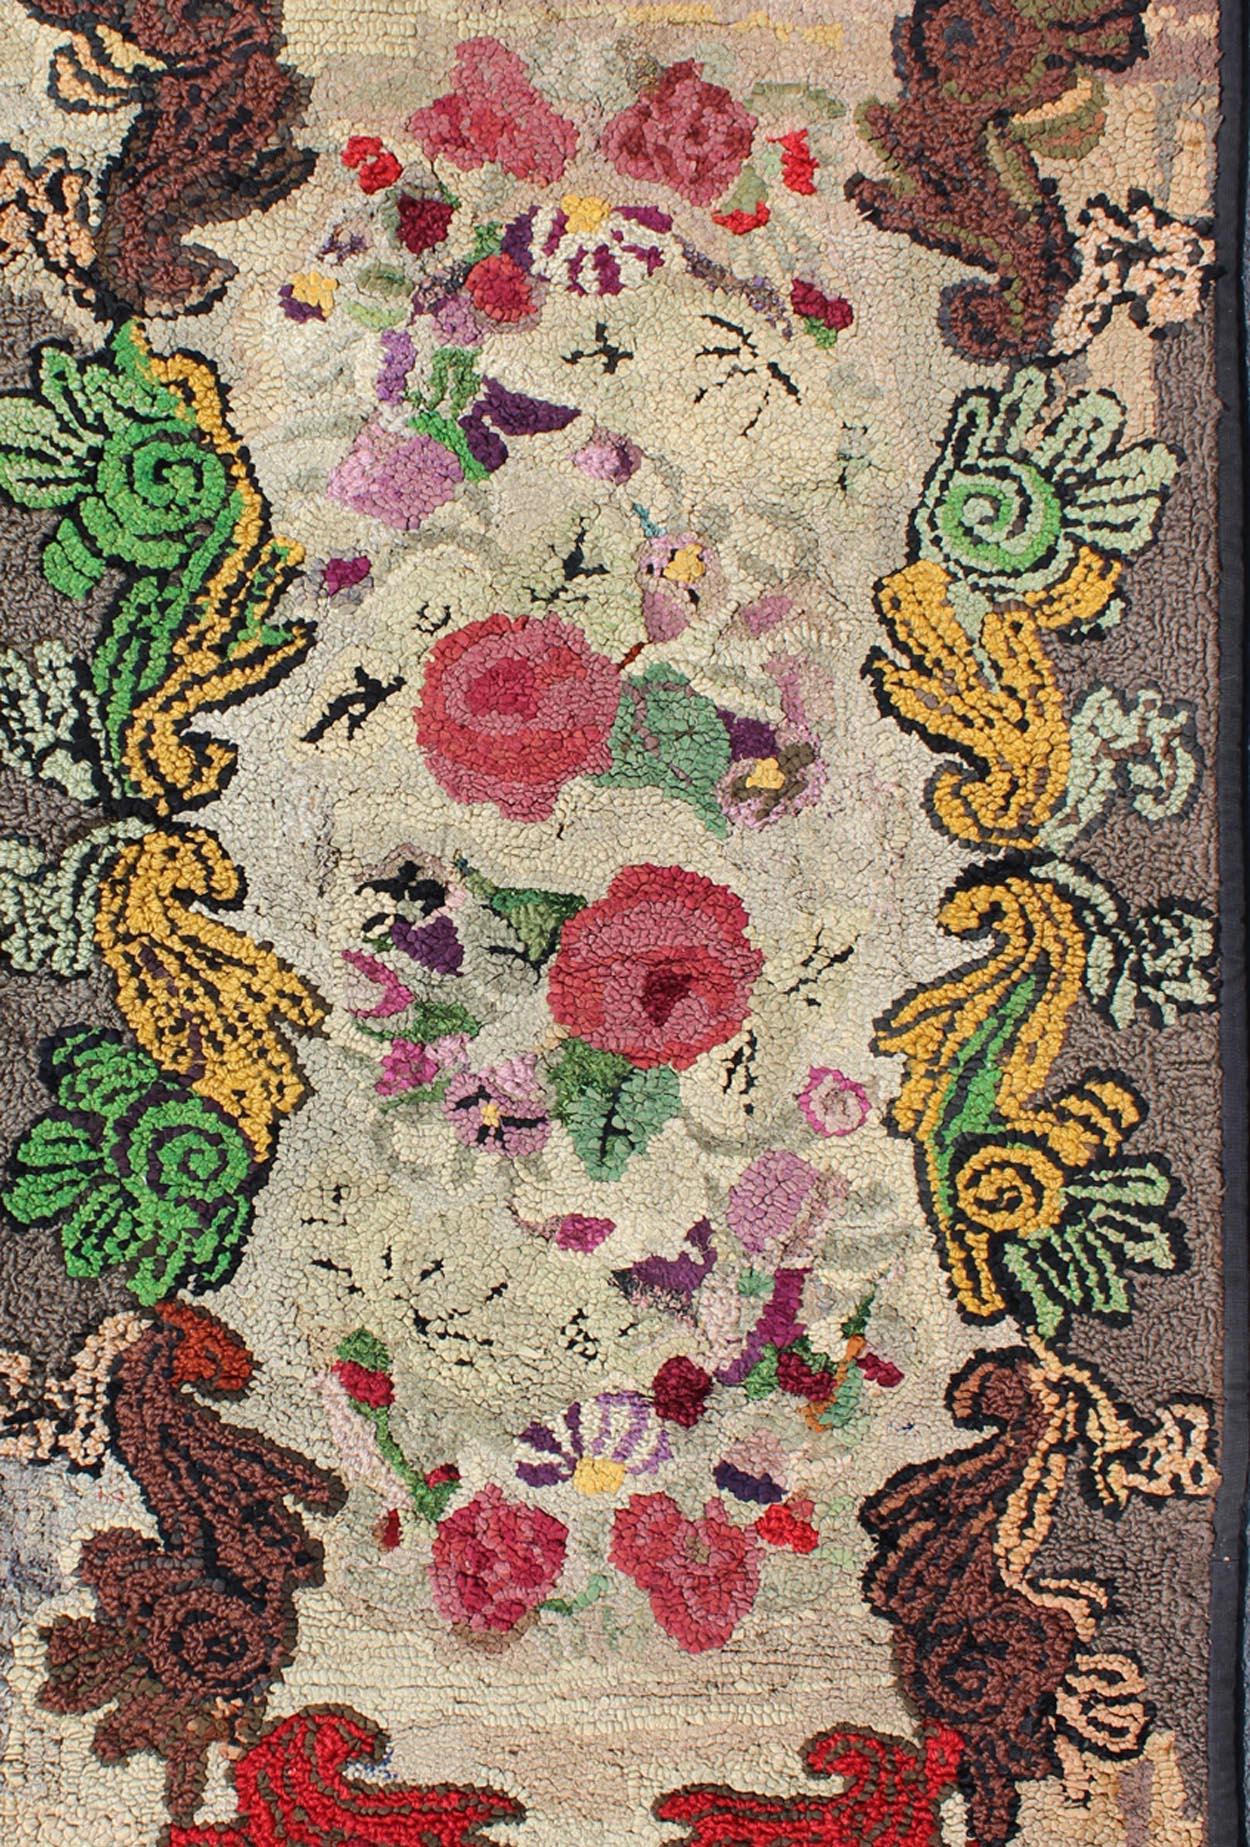 Colorful and gorgeous American hooked rug with red, rose, green, brown, gray and yellow flower bouquets, rug G-0305, country of origin / type: United States / Hooked, circa 1910.

This antique American hooked rug depicts beautiful floral